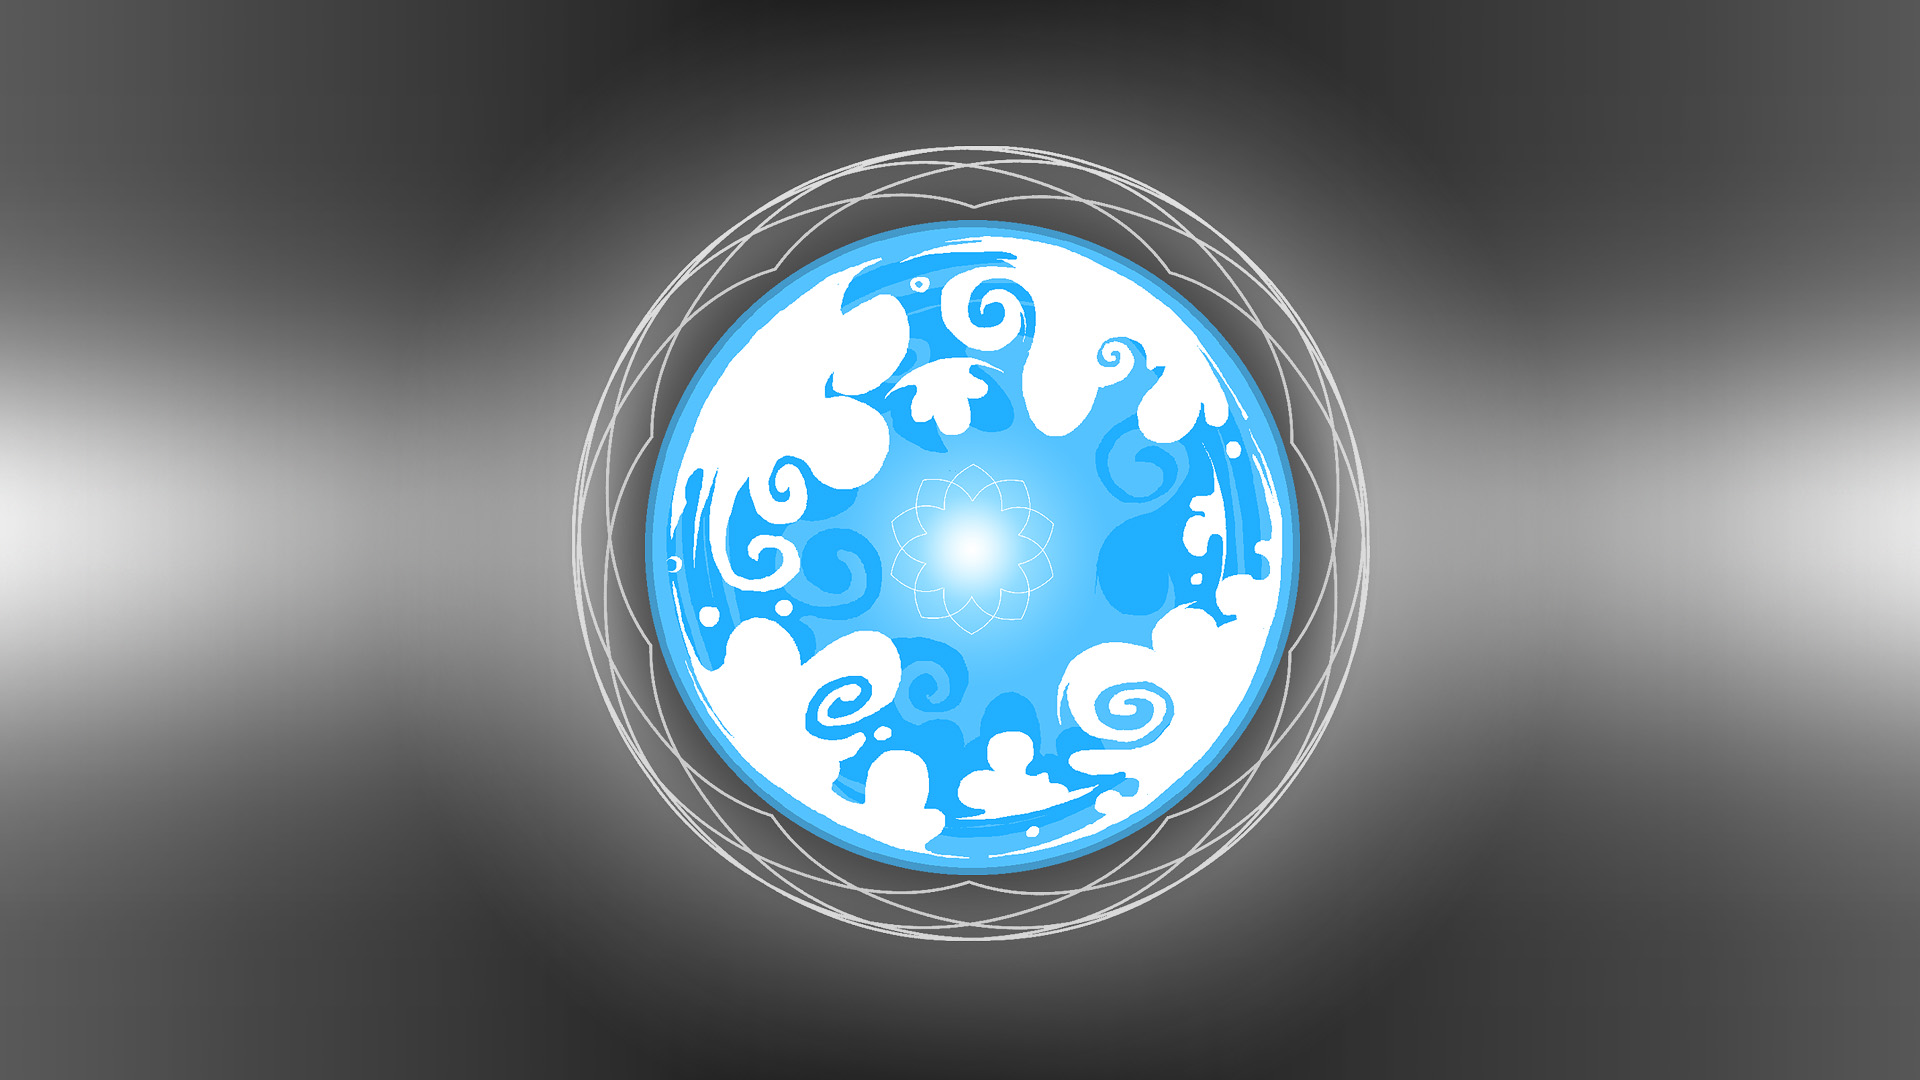 An image from Homestuck, Skaia: a blue sphere with cloud patterns floating in a grey black gradient